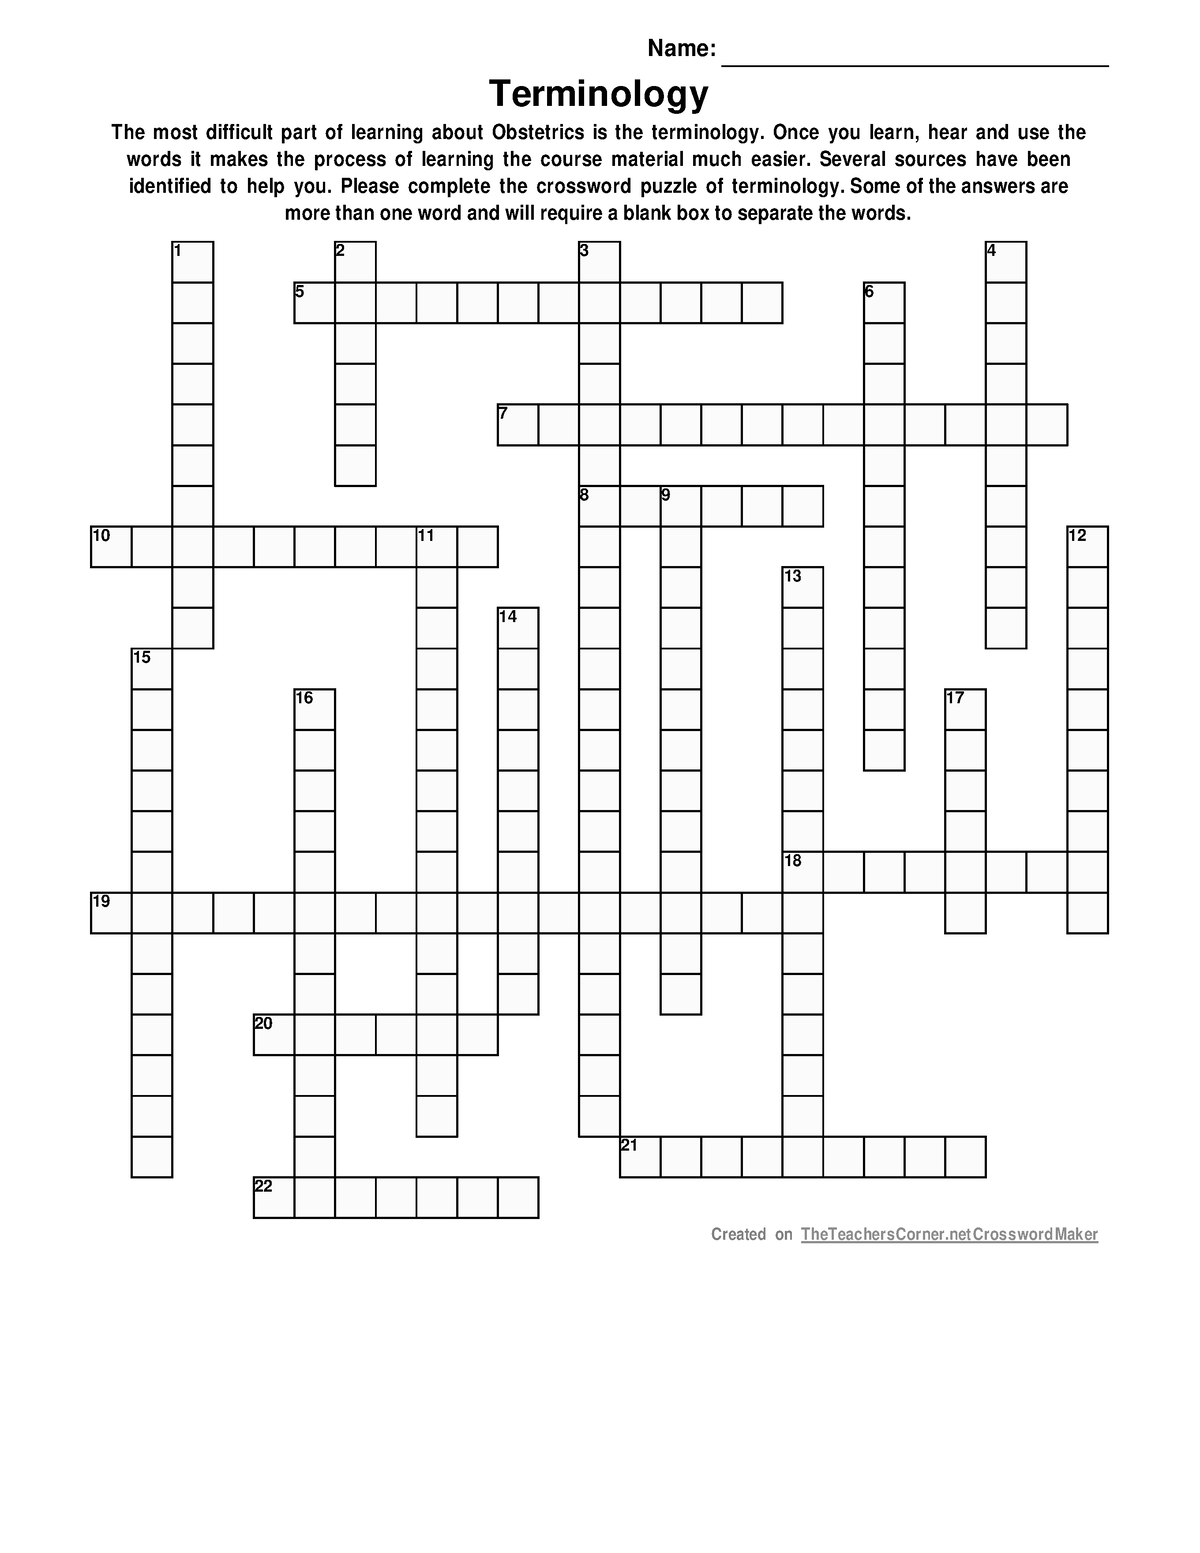 Crossword Puzzle Name: Terminology The most difficult part of